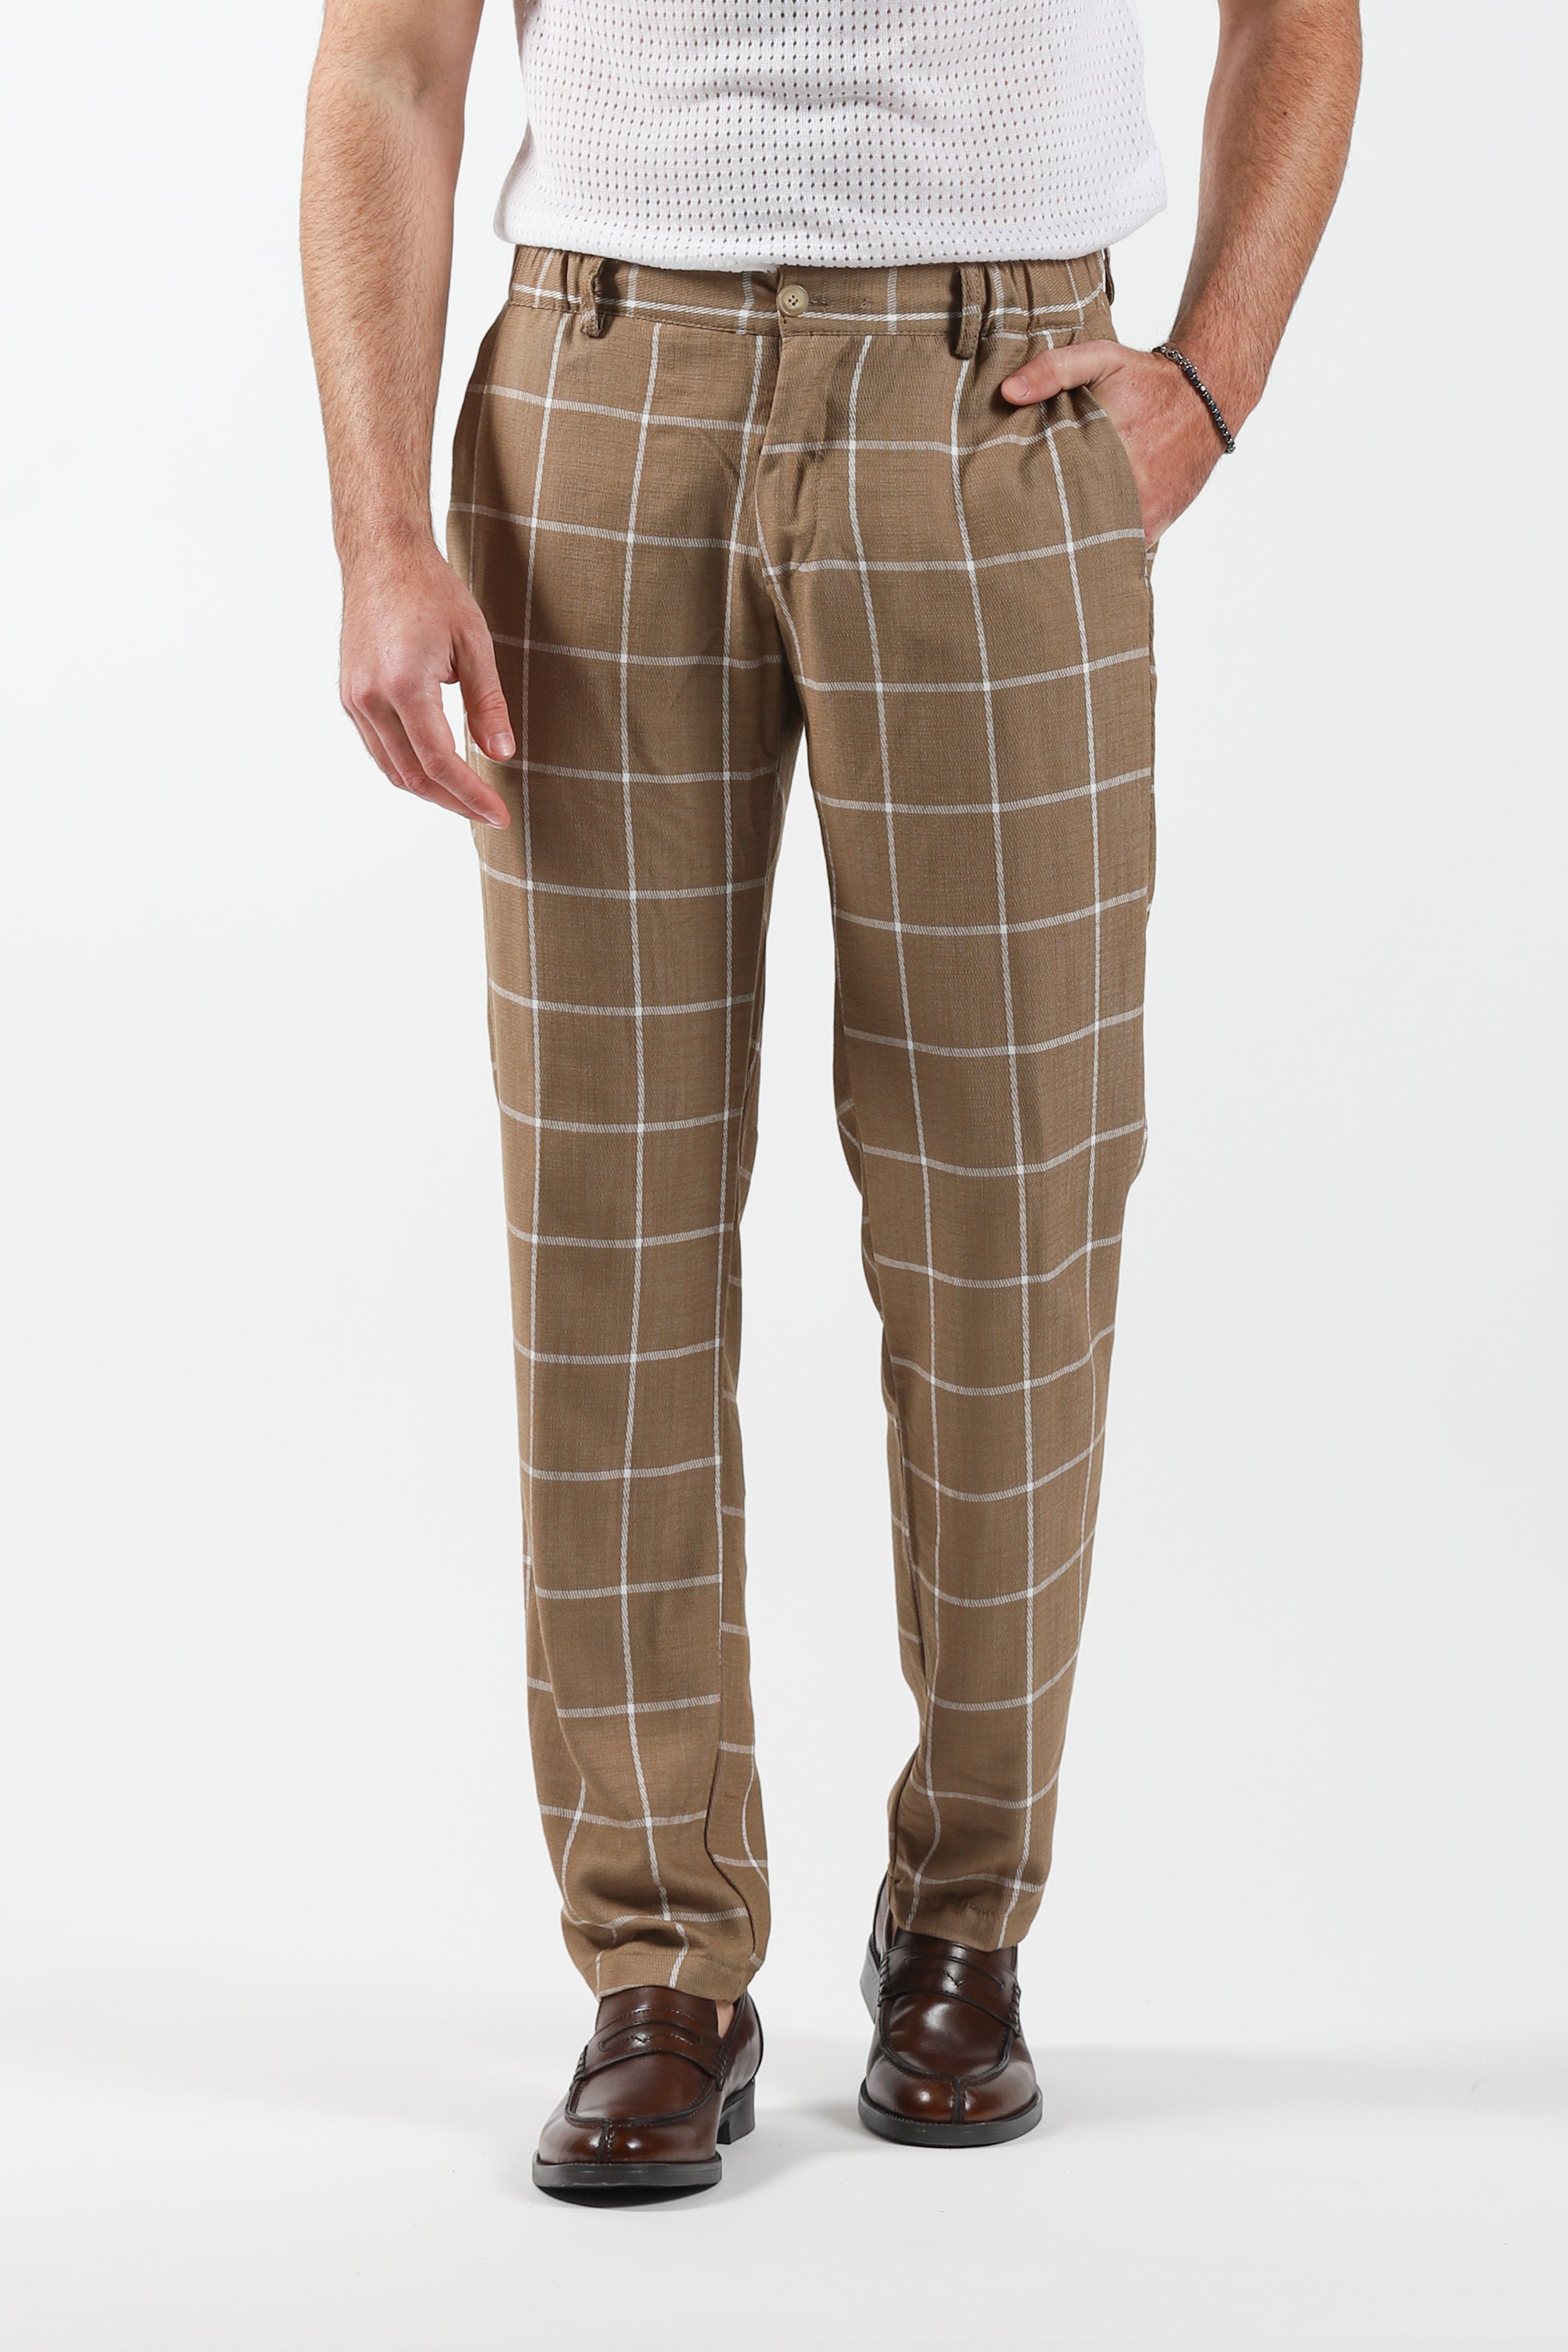 Reiss Elasticated Side Stripe Trousers - ShopStyle Pants